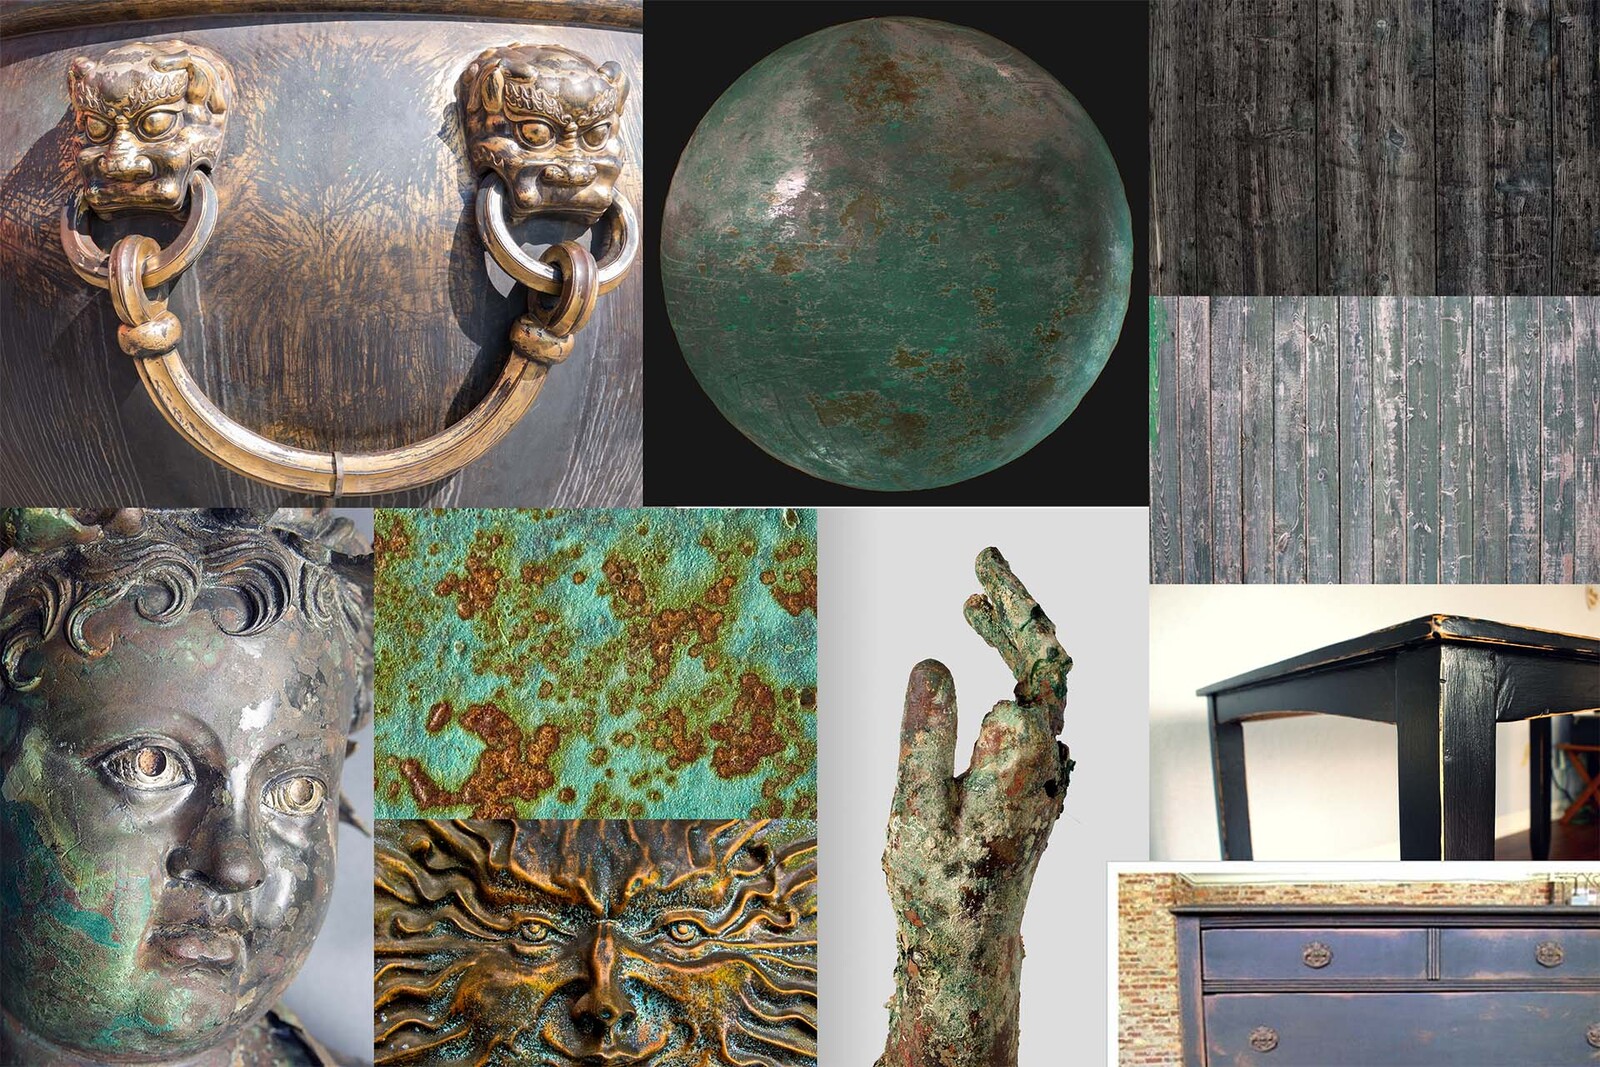 Preliminary material reference gathering for the corroded bronze and aged wood